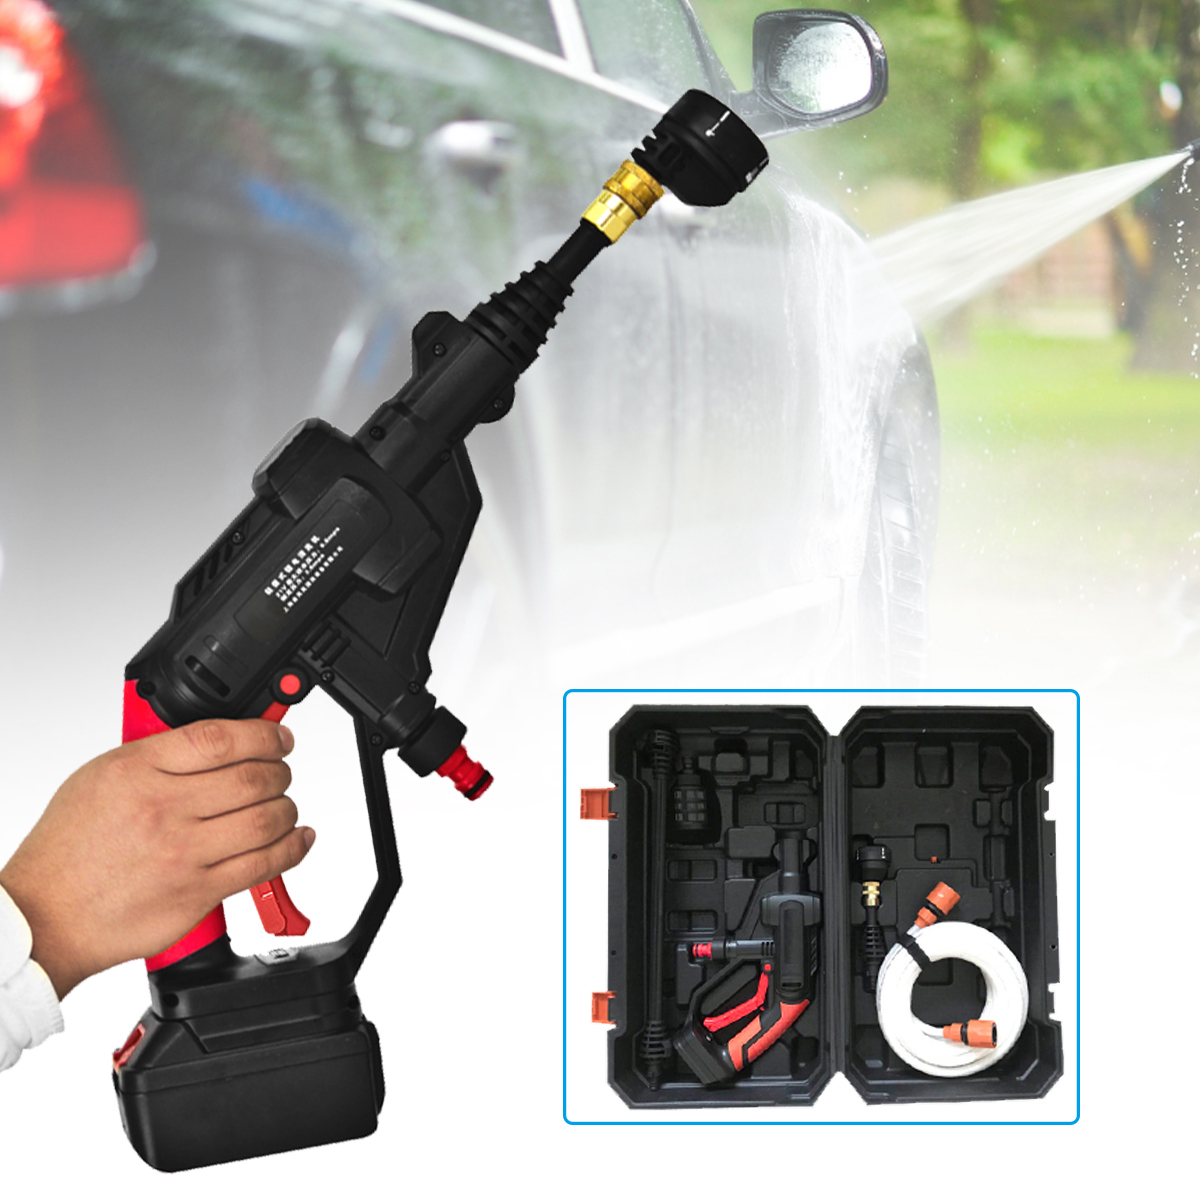 21V-Multifunctional-Cordless-Pressure-Cleaner-Washer-Sprayer-Water-Hose-Nozzle-Pump-with-Battery-1292573-1